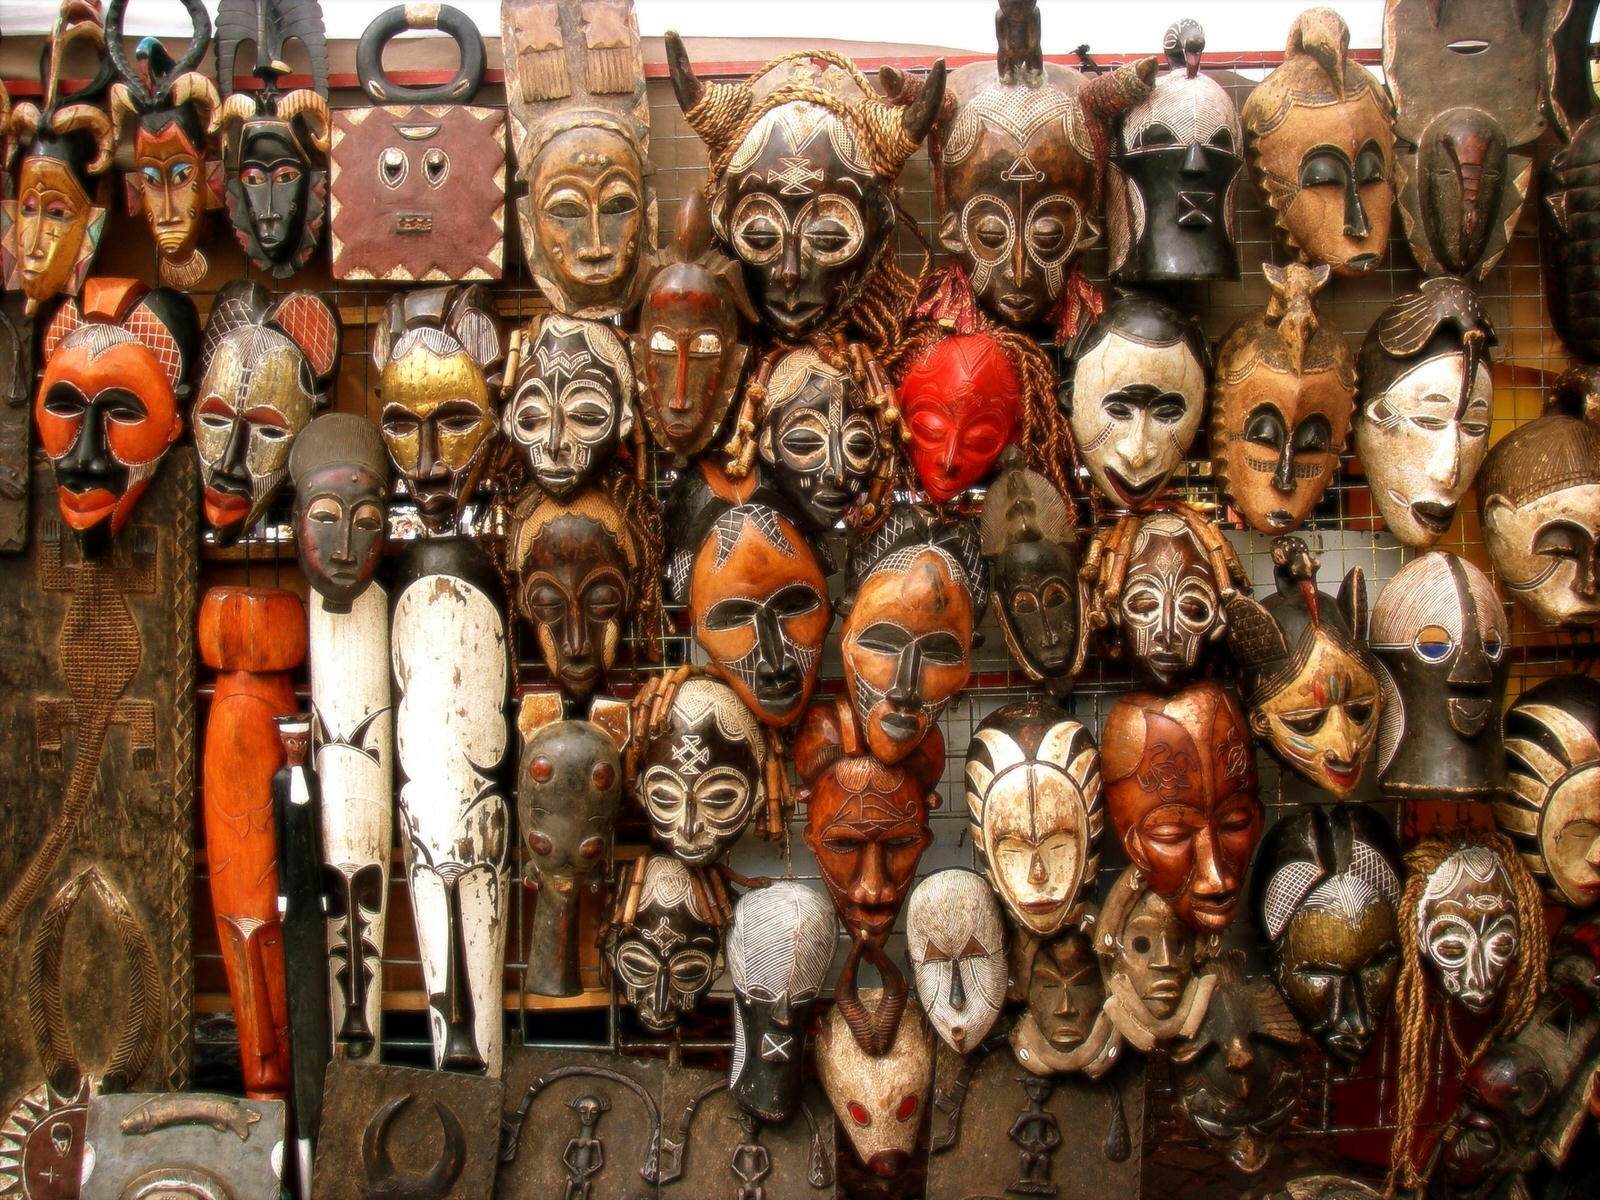 A wall is covered in traditional carved wooden masks from across Africa.